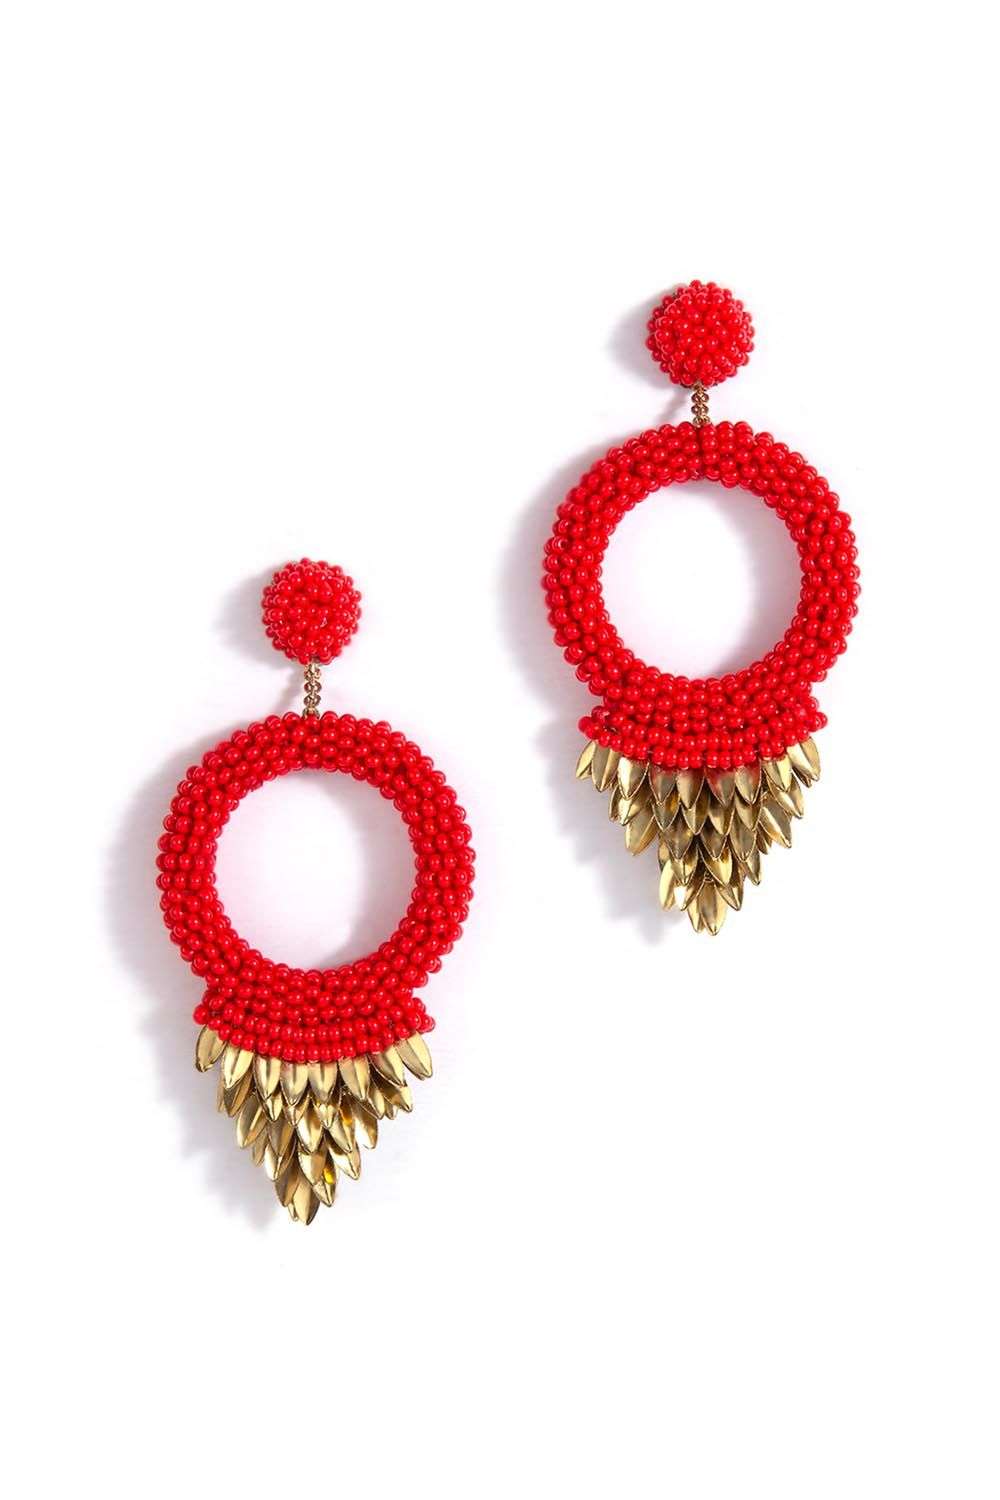 Christmas earrings accessories party wear, Red Pompom hanging with Candy  sticks - Little Surprise Box